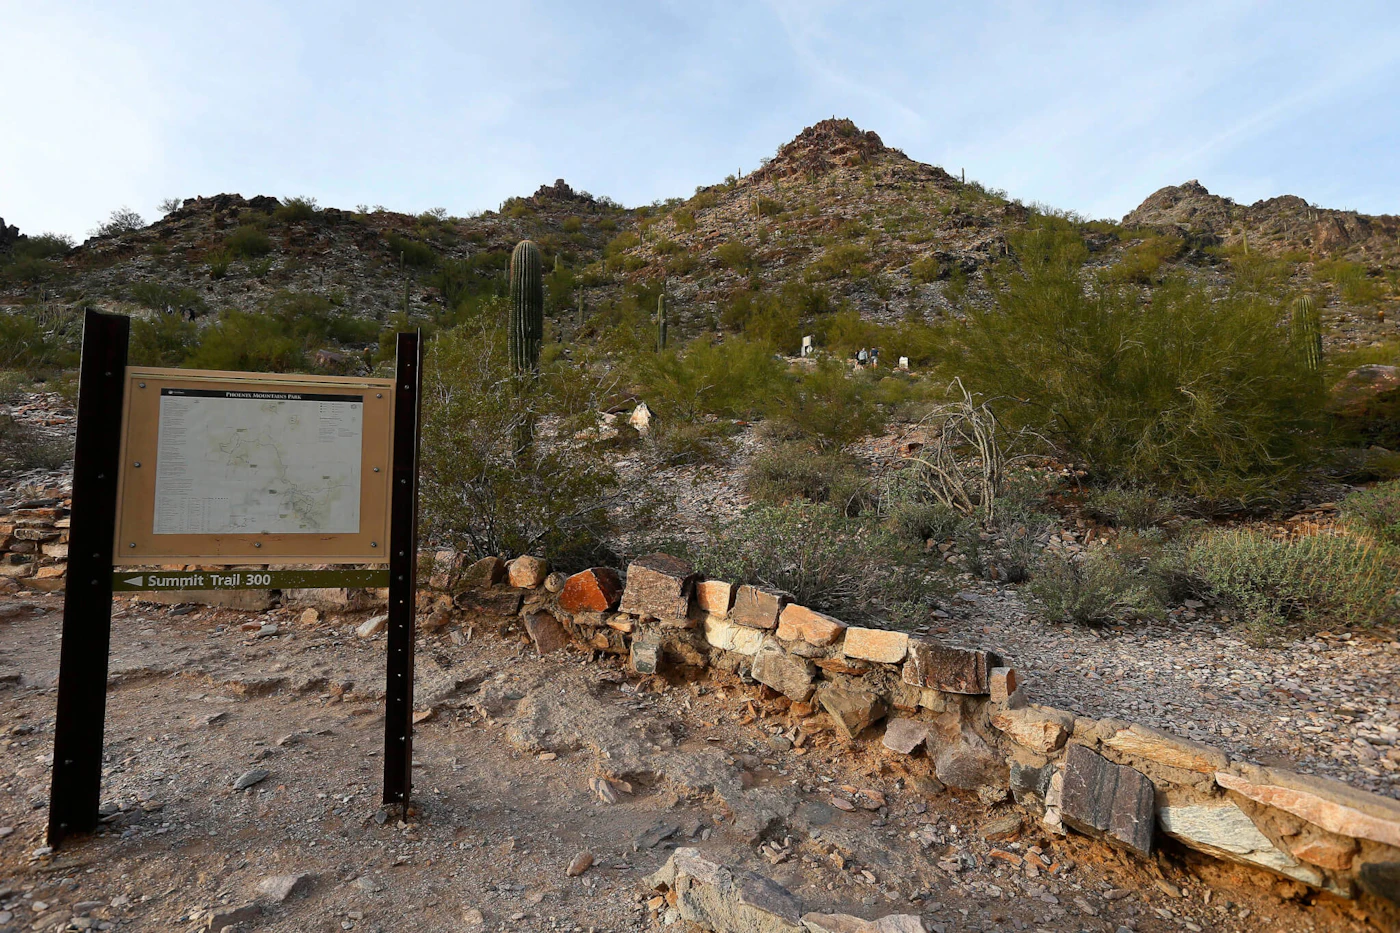 Hikers walk on the Phoenix Mountain Preserve trail up to Piestewa Peak in Phoenix on Tuesday, Jan. 10, 2017. A movement is afoot to change a controversial street name near the Phoenix mountain that formerly had a title which offended Native Americans and others. The mountain was changed from "Sq*** Peak" to "Piestewa Peak" more than a decade ago. Mayor Greg Stanton has called for a renaming of Sq*** Peak Drive and asked city staff last fall to start the name change process, The Arizona Republic reported. (AP Photo/Ross D. Franklin)